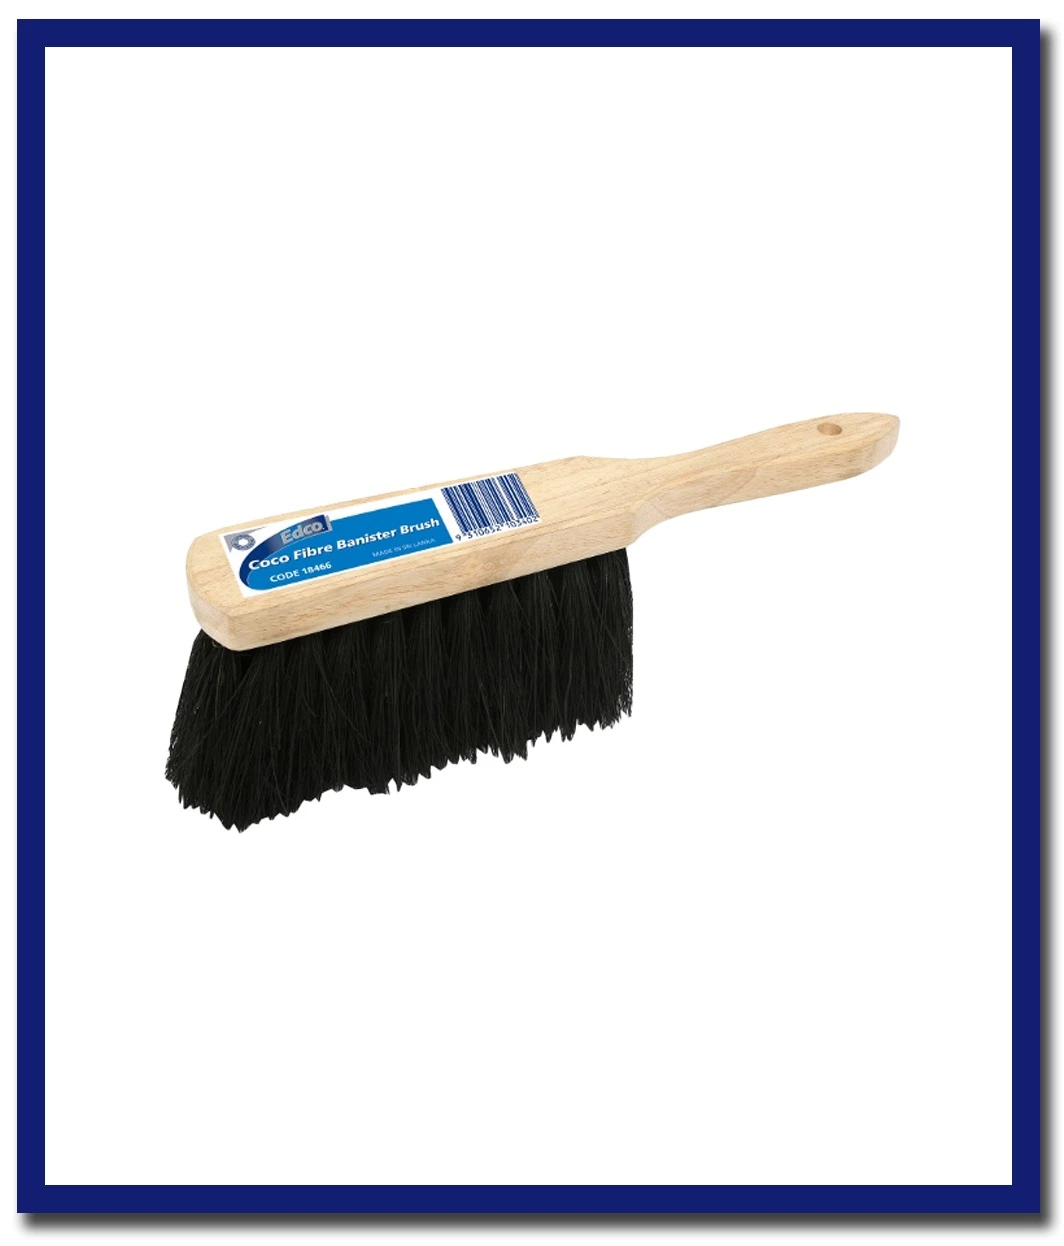 Edco Banister Brush With Coco Fill - 1 Unit - Stone Doctor Australia - Cleaning Accessories > Sweeping > Banister Brush